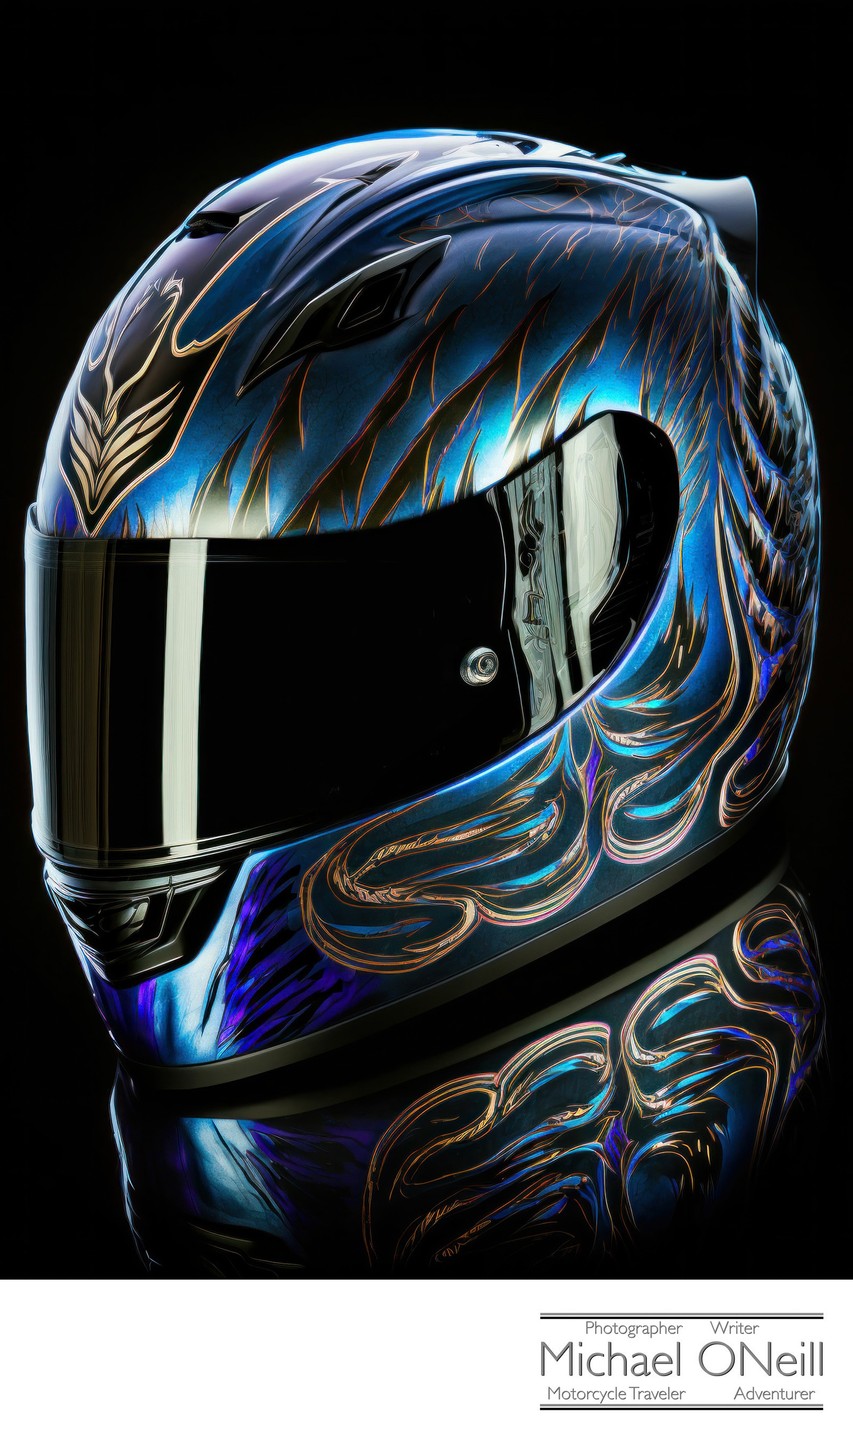 AI Generated Image Of An Intricately Decorated Racing Helmet